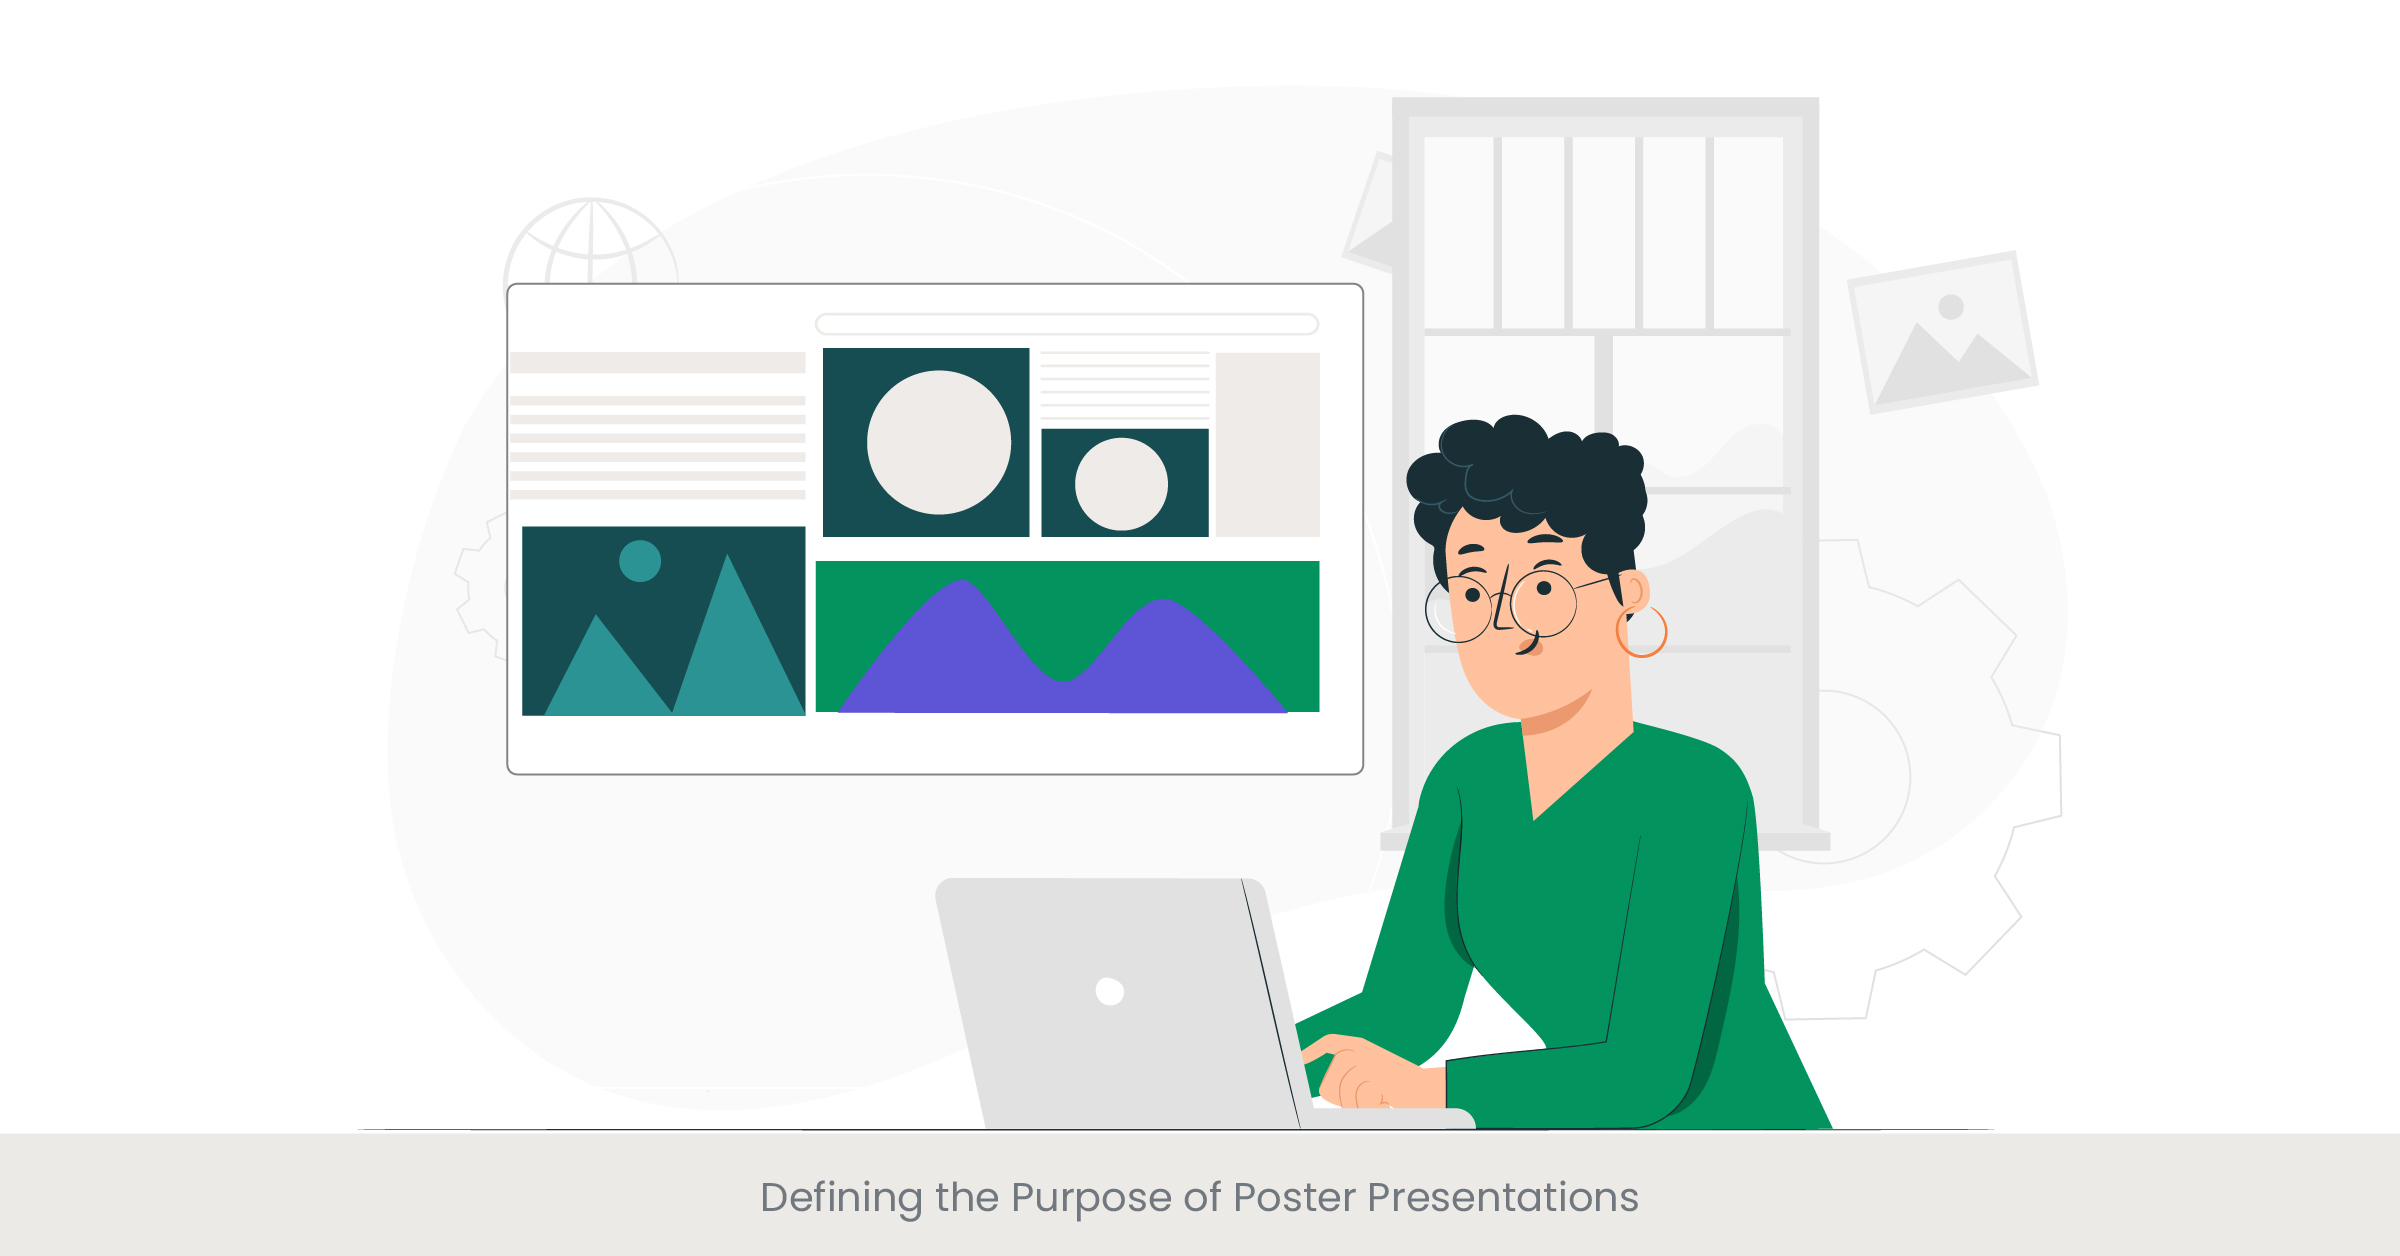 Defining the Purpose of Poster Presentations